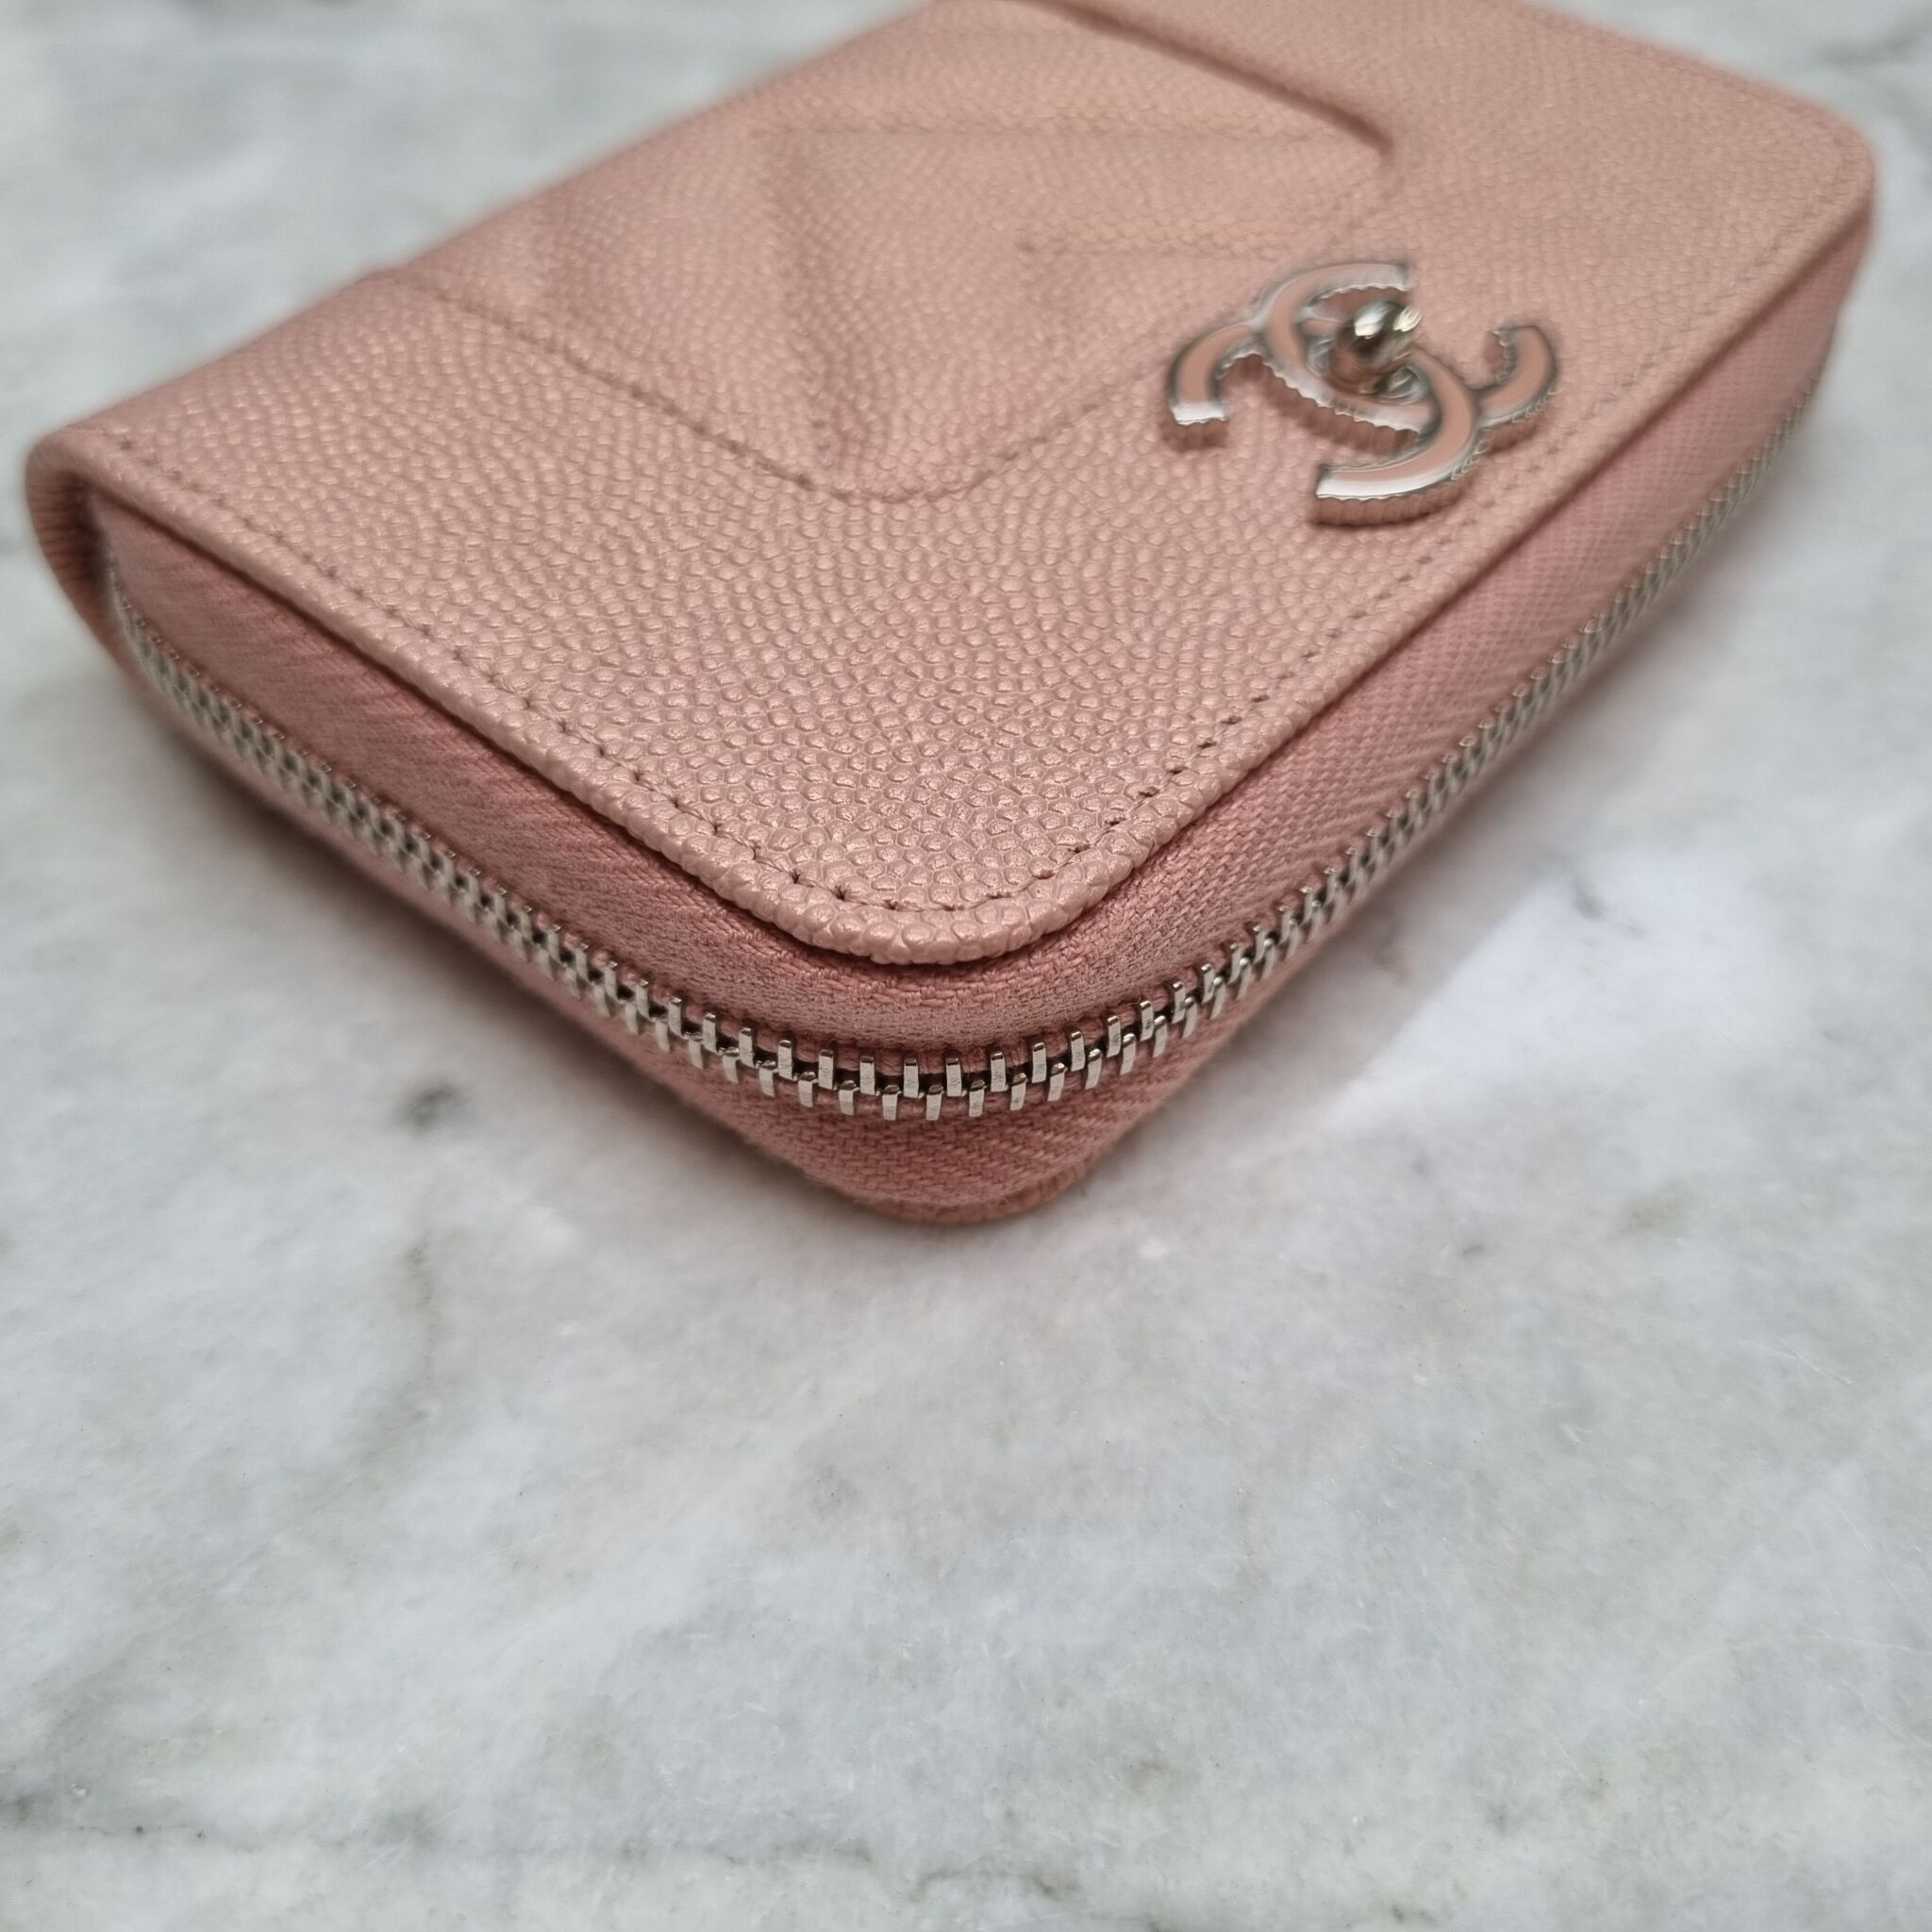 CHANEL Iridescent Caviar Quilted Zip Coin Purse Pink 866244